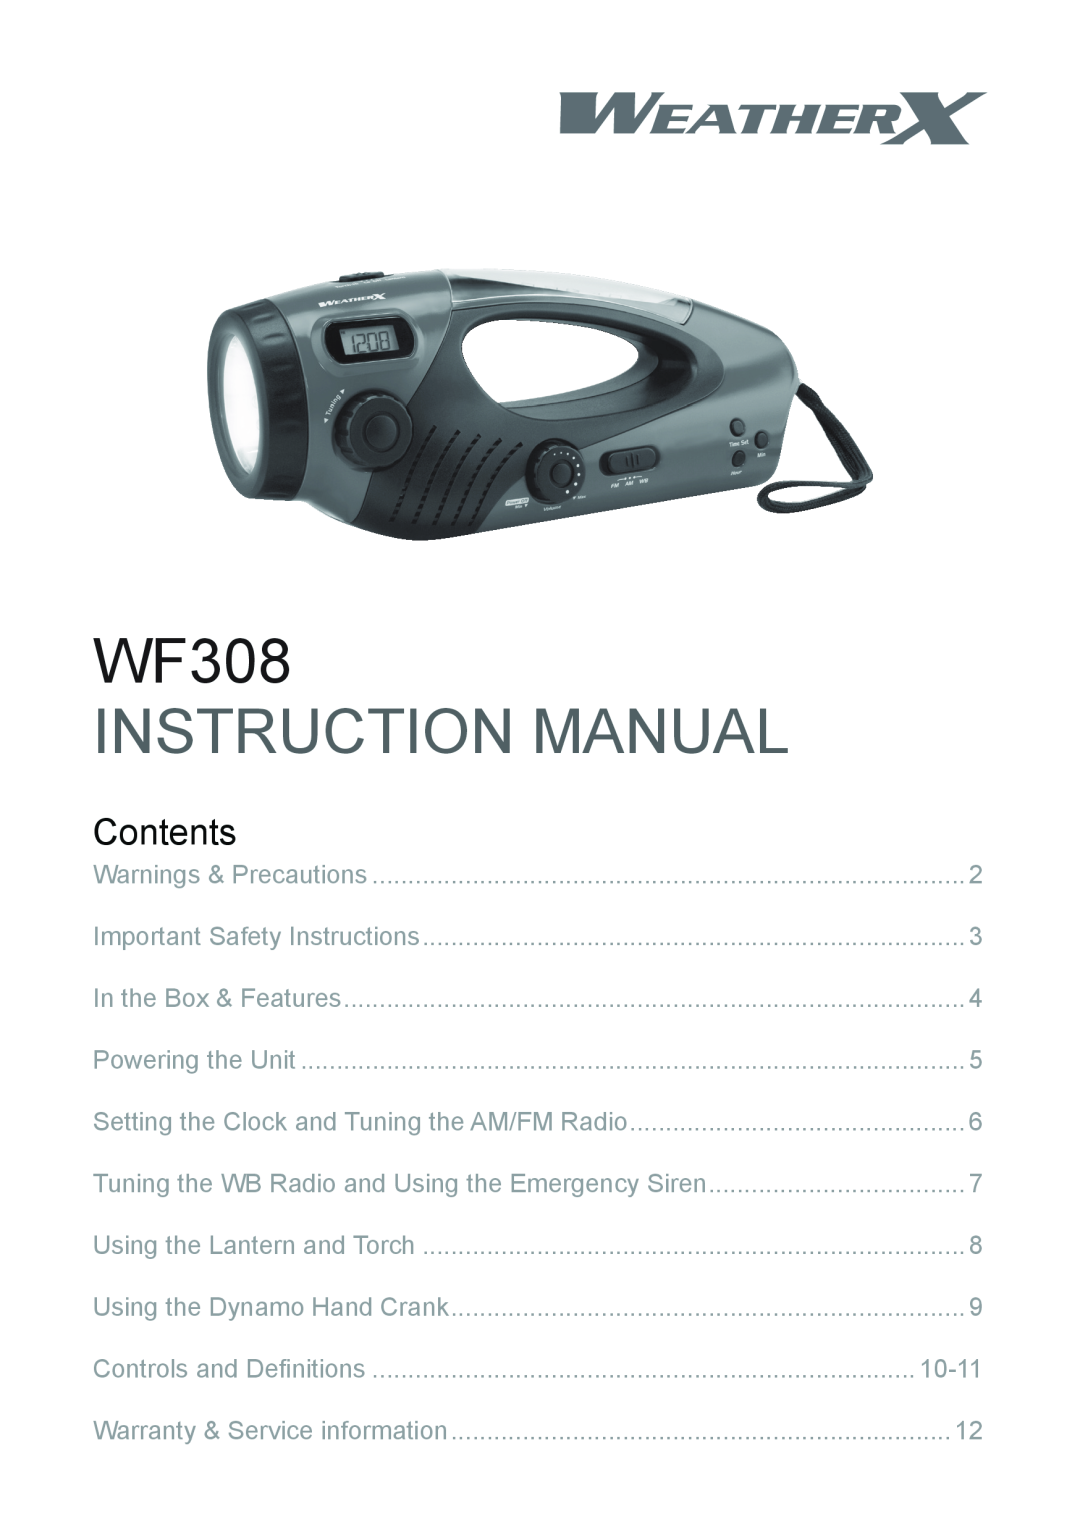 Weather X WF308 instruction manual Contents, 10-11 